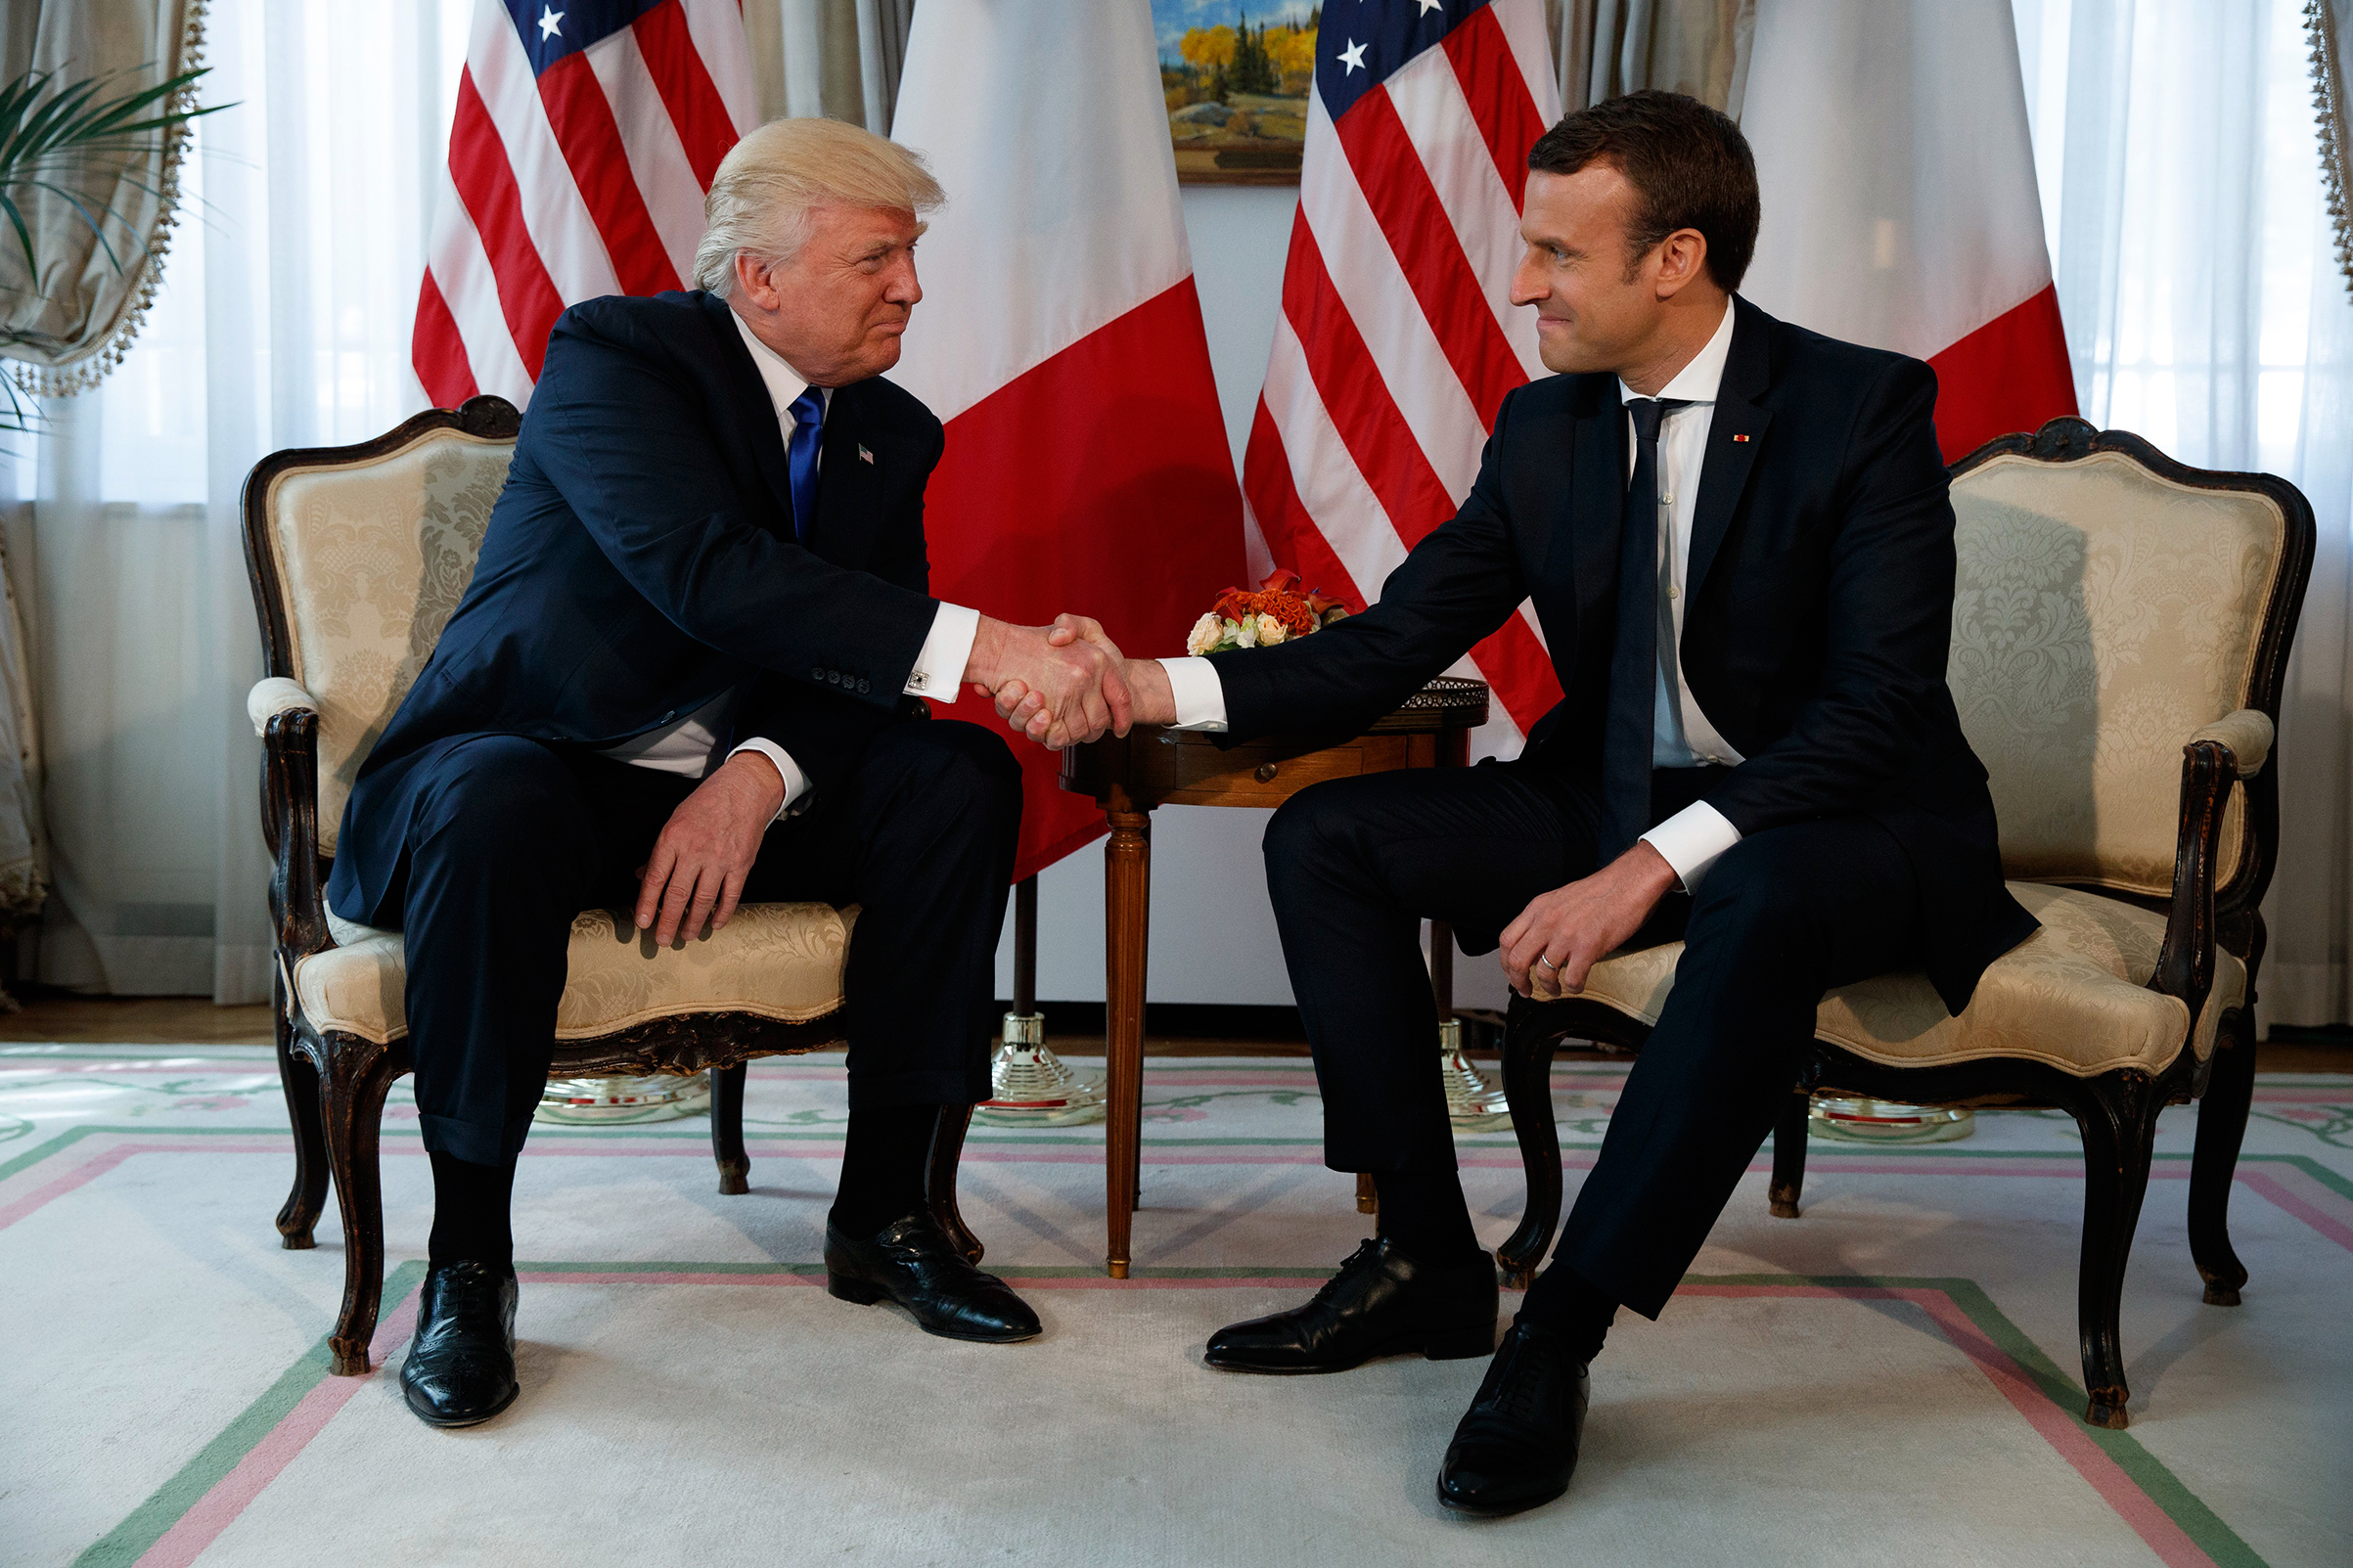 President Trump shakes hands with French President Emmanuel Macron during a meeting at the U.S. Embassy in Brussels on May 25, 2017.